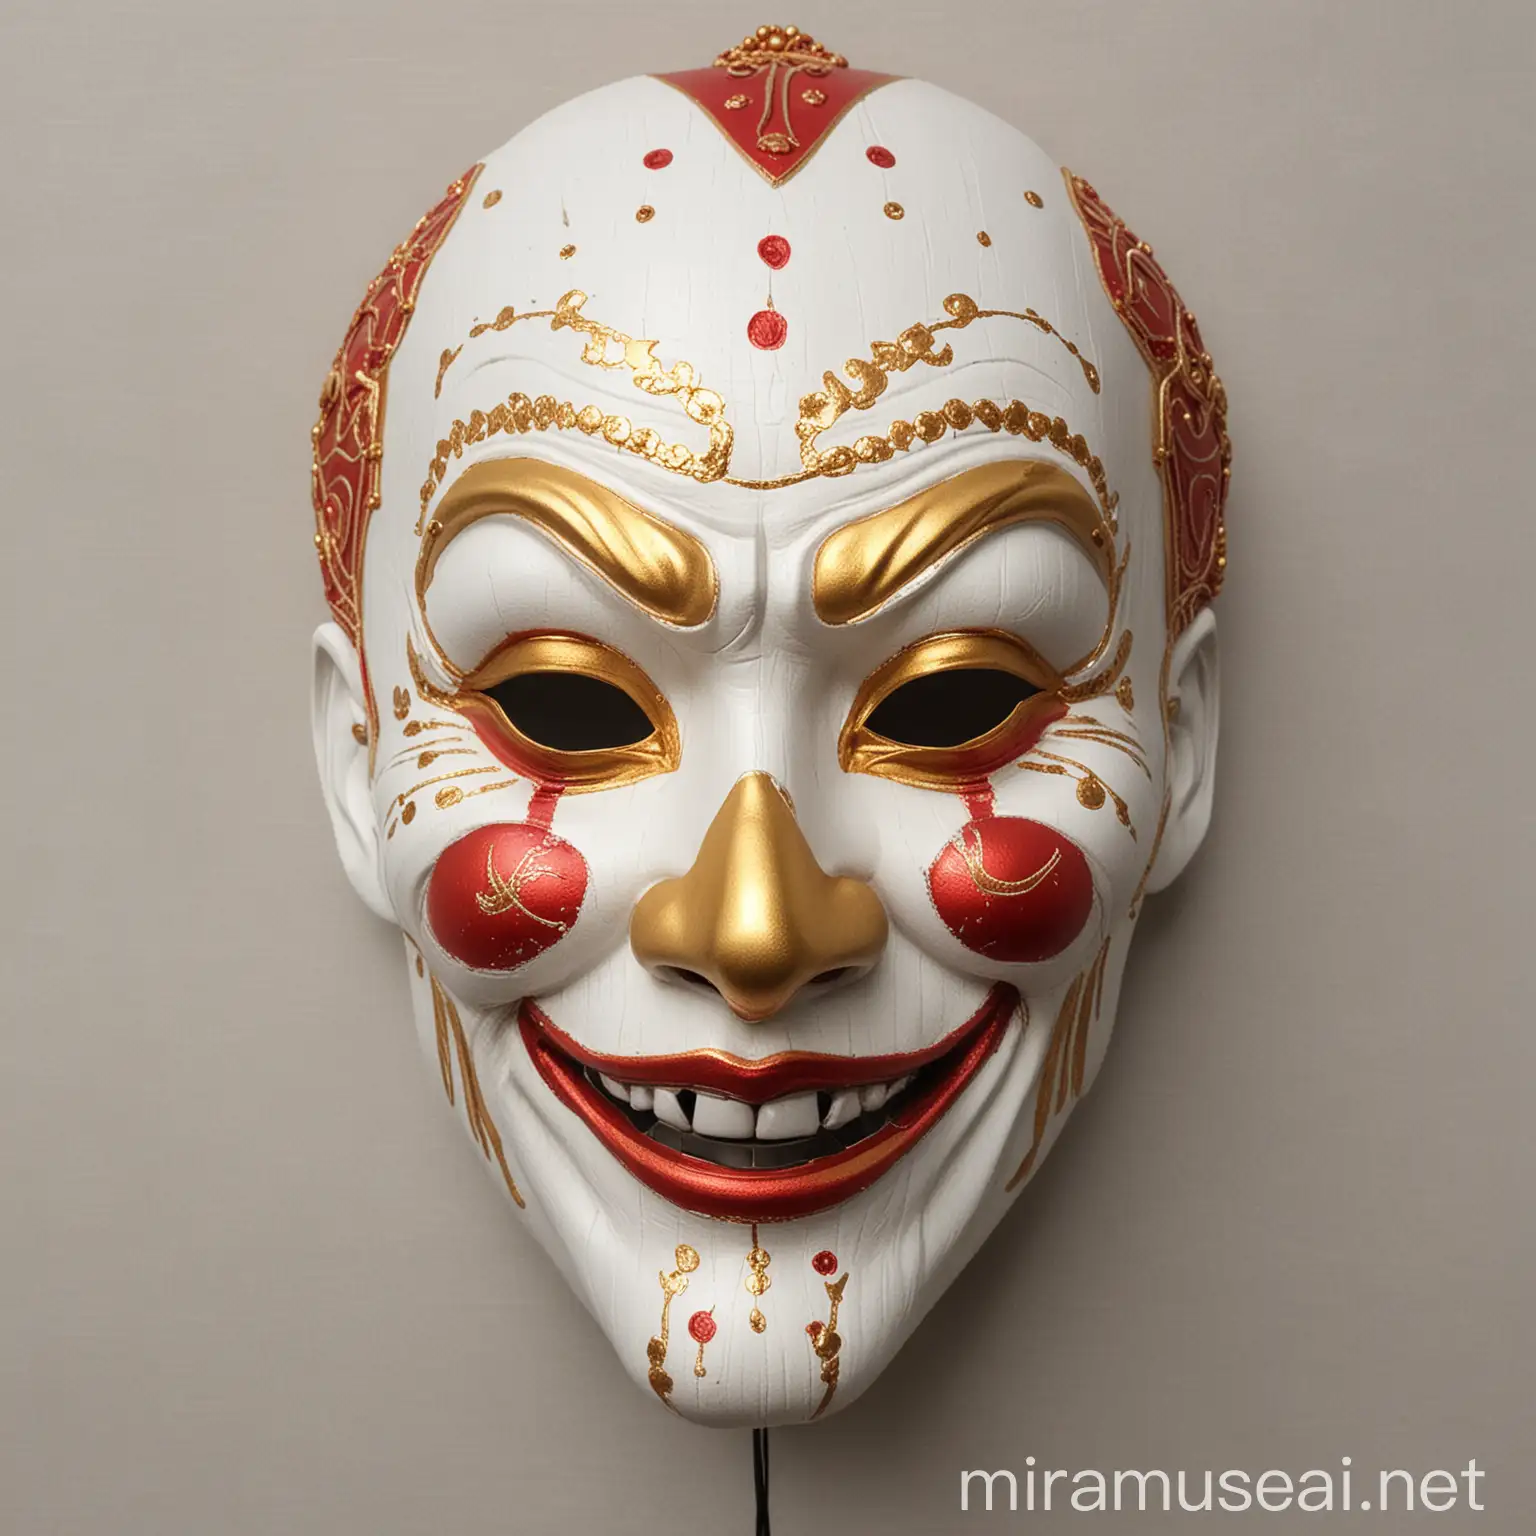 Japanese White Clown Man Mask with Ornate Gold and Red Accents